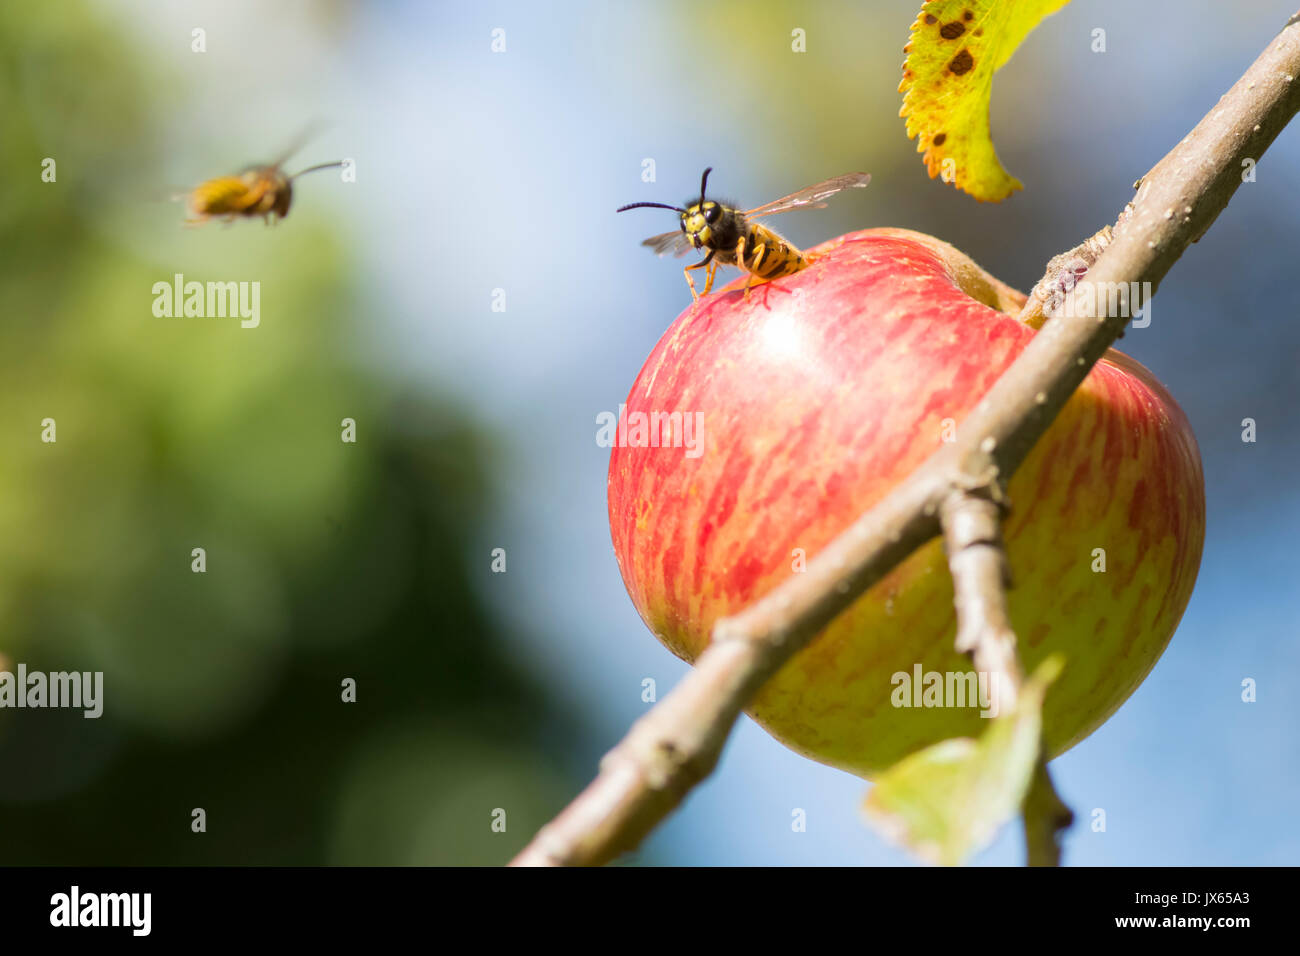 Two Common wasps, Vespula vulgaris, one flying, eating hole in eating apple, Sussex, UK. August Stock Photo